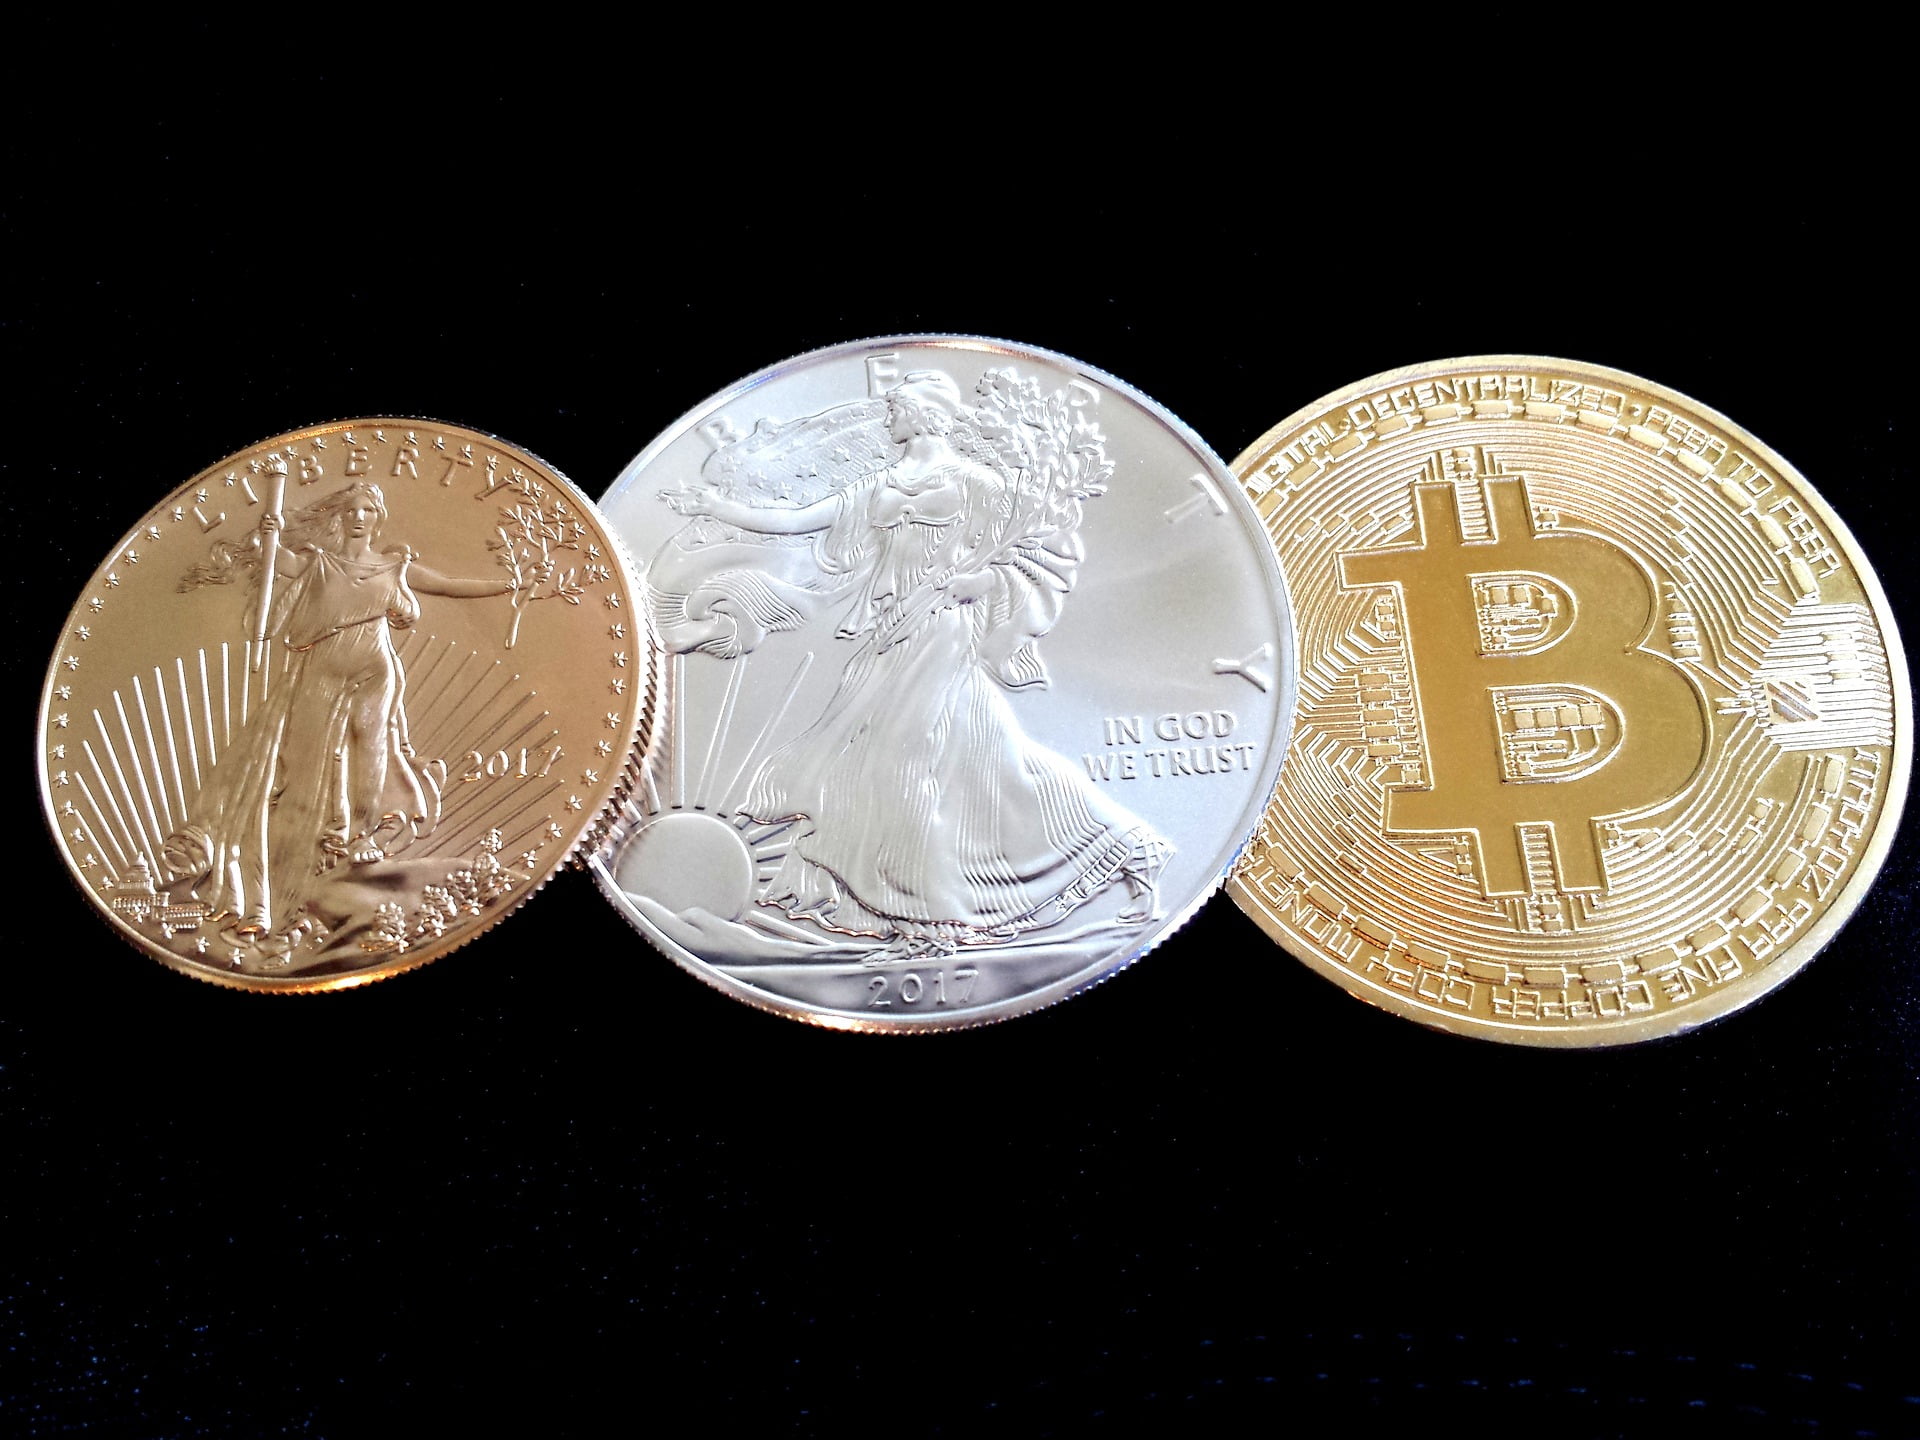 Silver & Gold: Precious Metals Tapping New Highs Bodes Well For Bitcoin